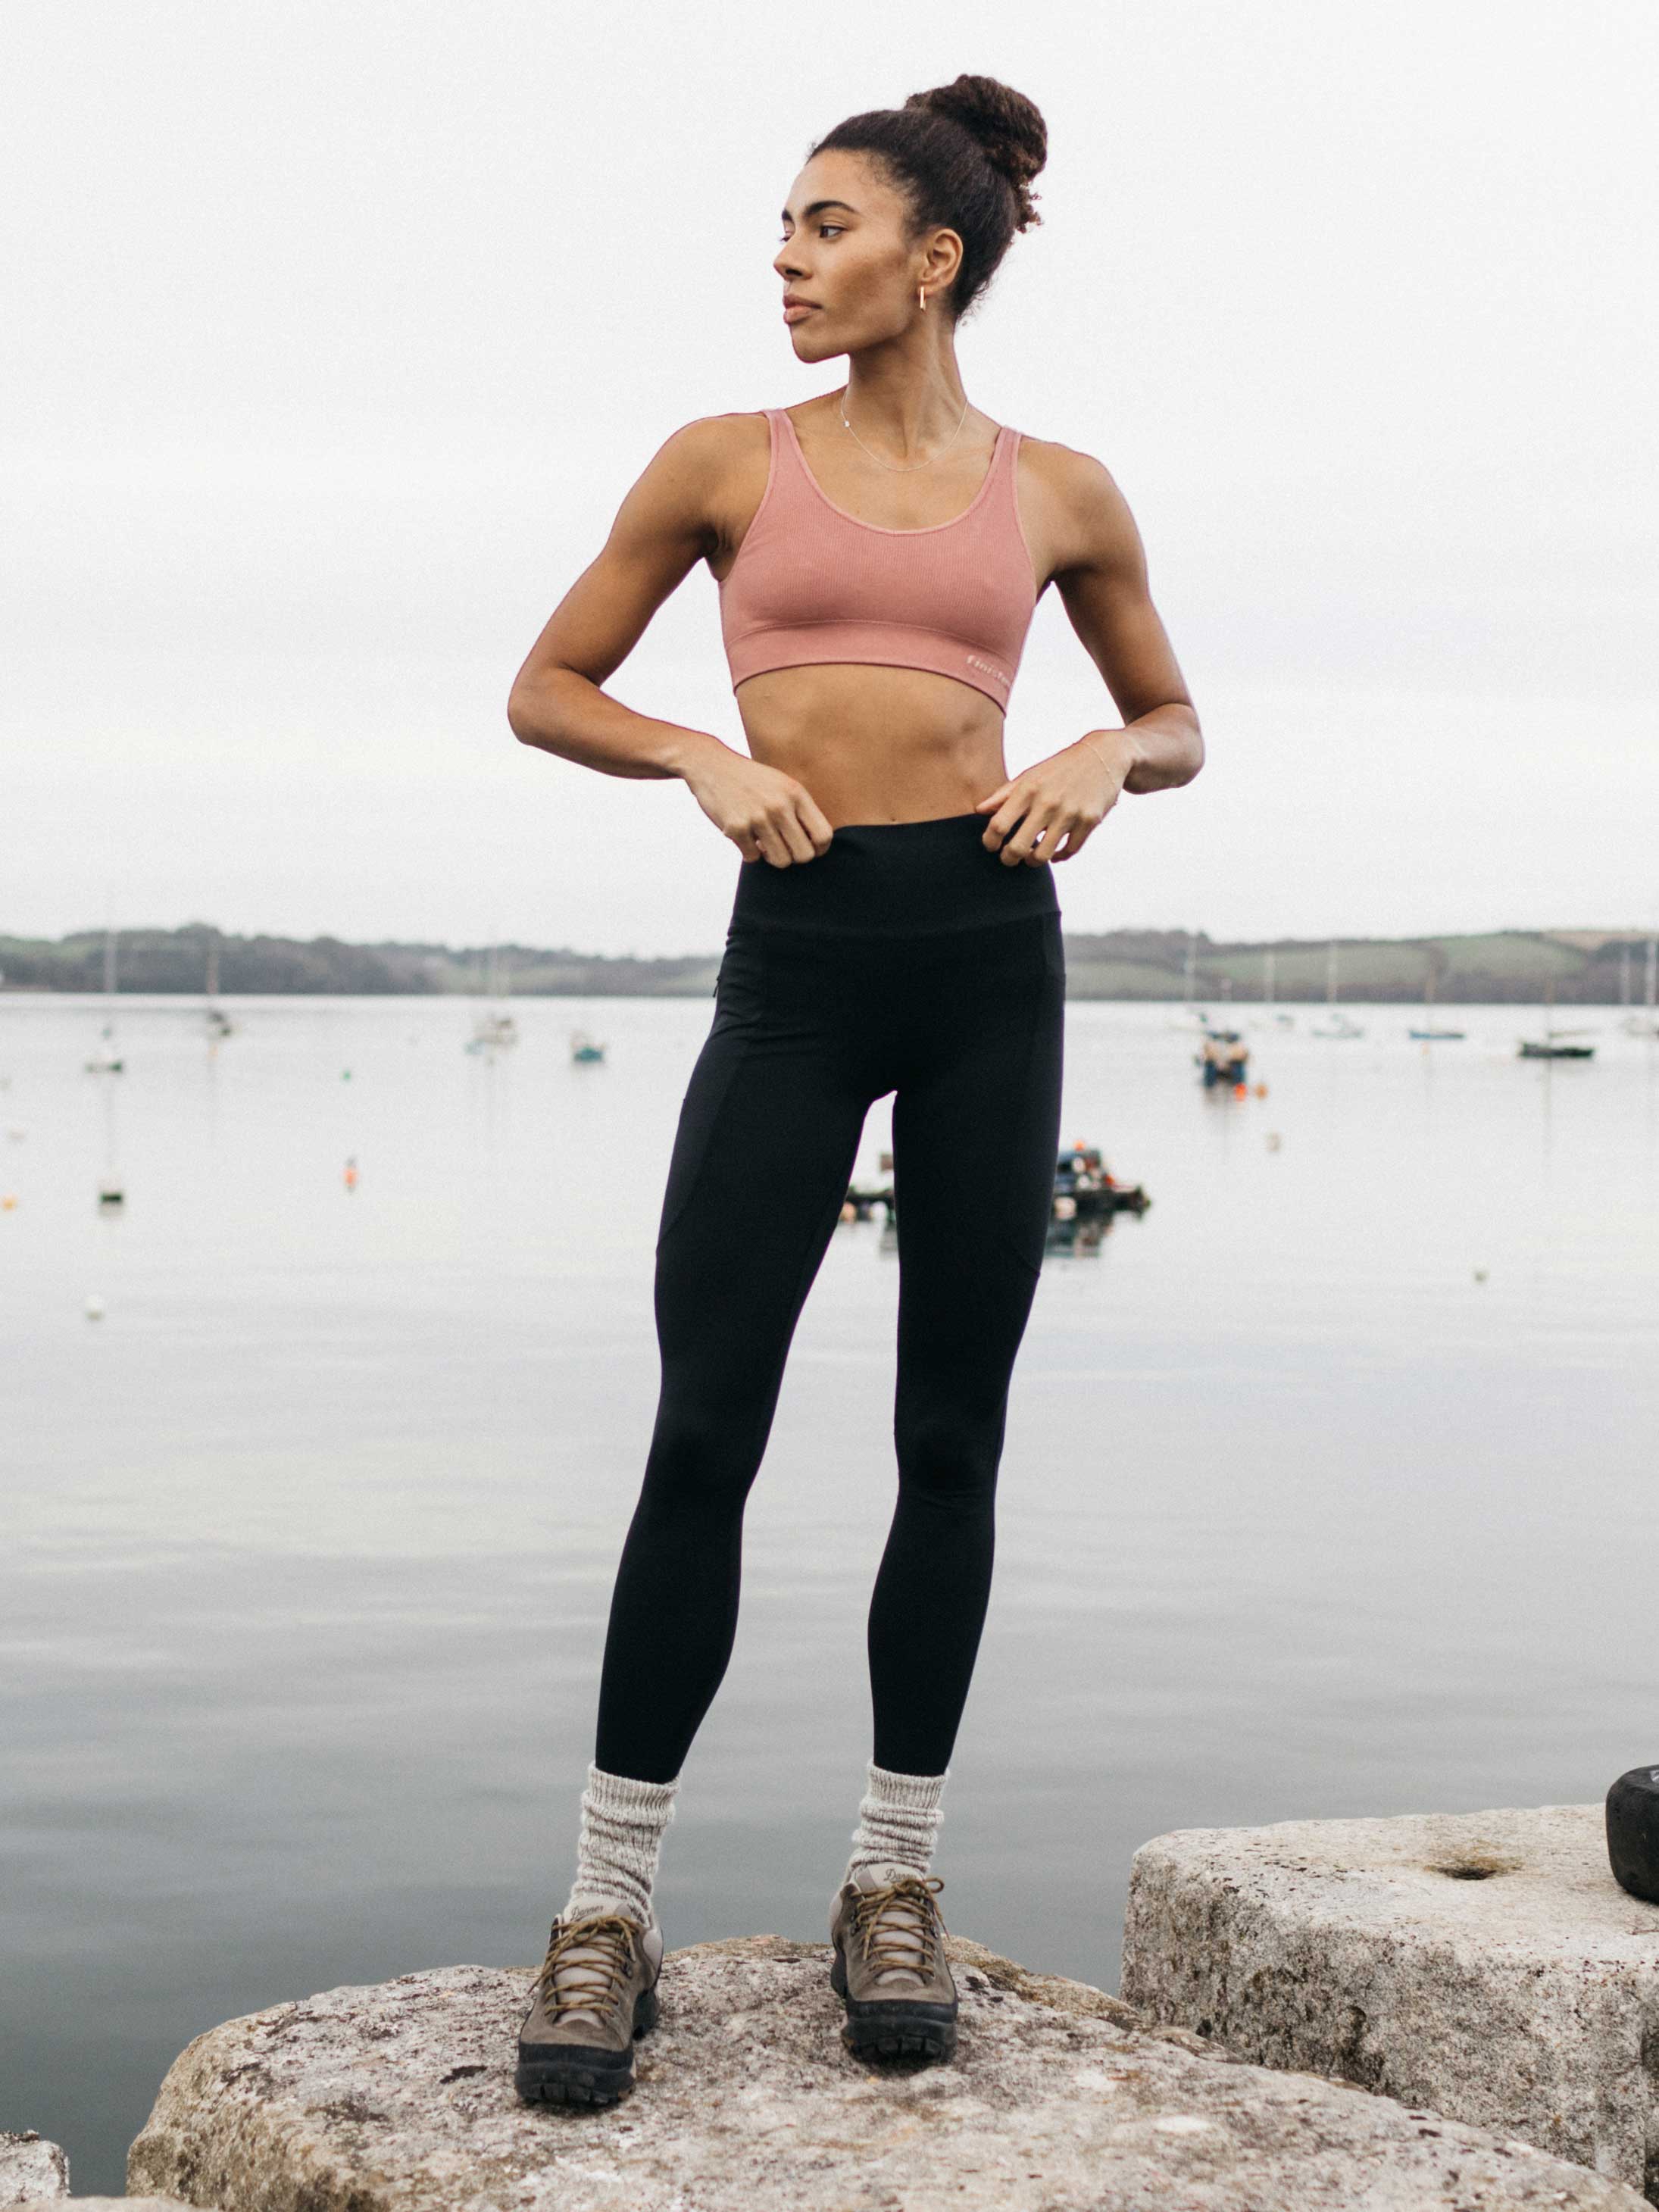 MERINO WOOL Blend Women's Thermal Underwear Base Layer Leggings Bottoms.  Perfect for Winter Layering and Sports. Thermal Underwear. 